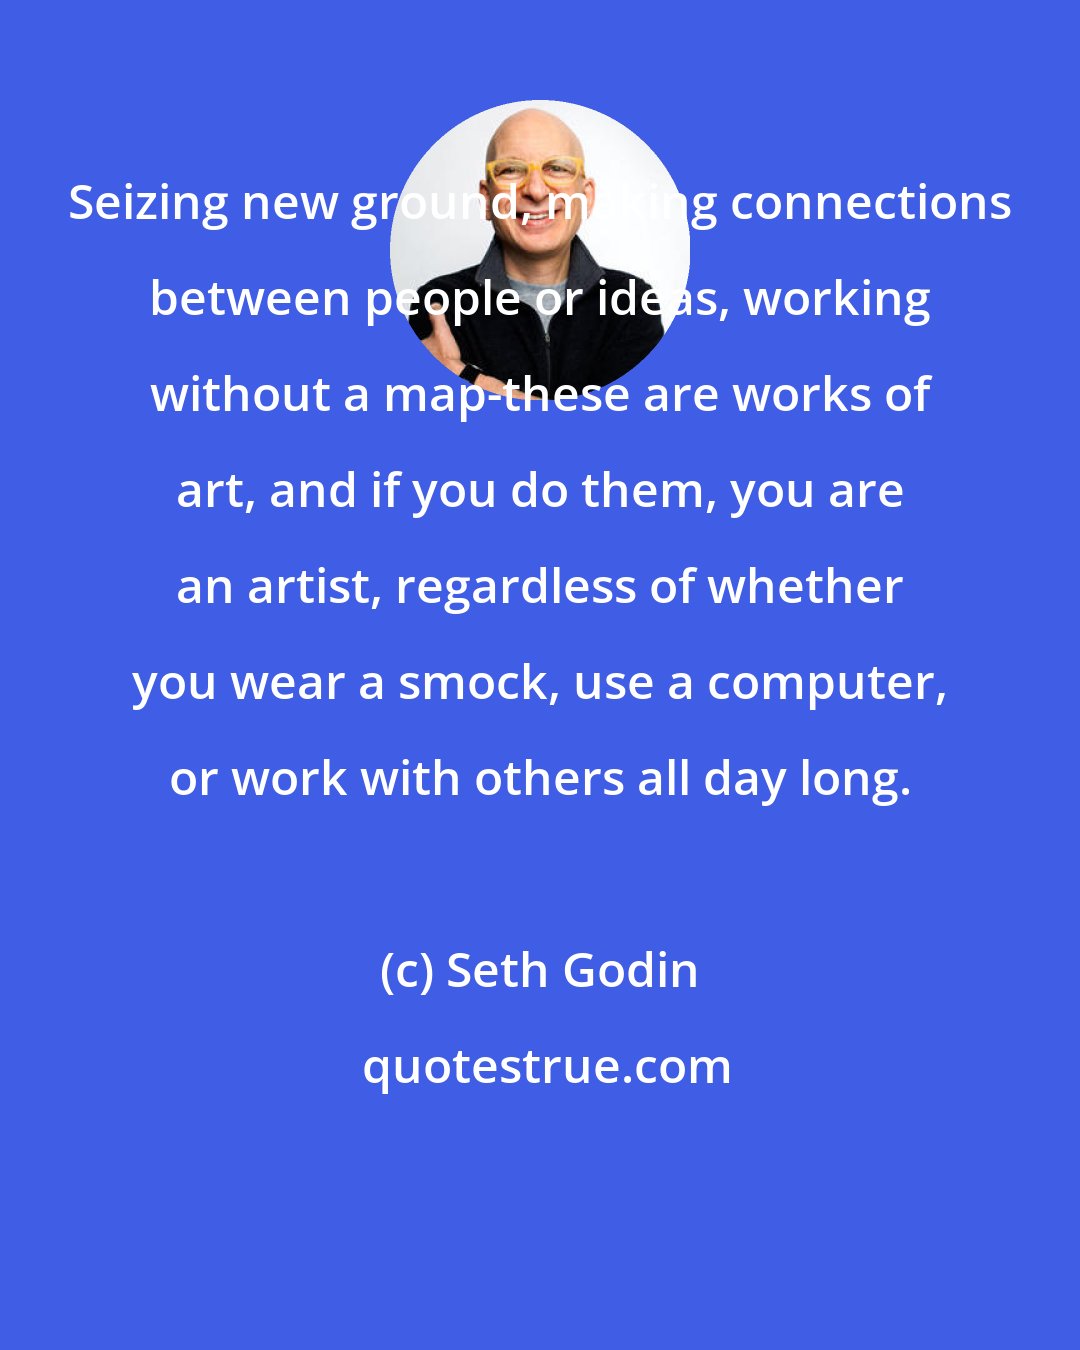 Seth Godin: Seizing new ground, making connections between people or ideas, working without a map-these are works of art, and if you do them, you are an artist, regardless of whether you wear a smock, use a computer, or work with others all day long.